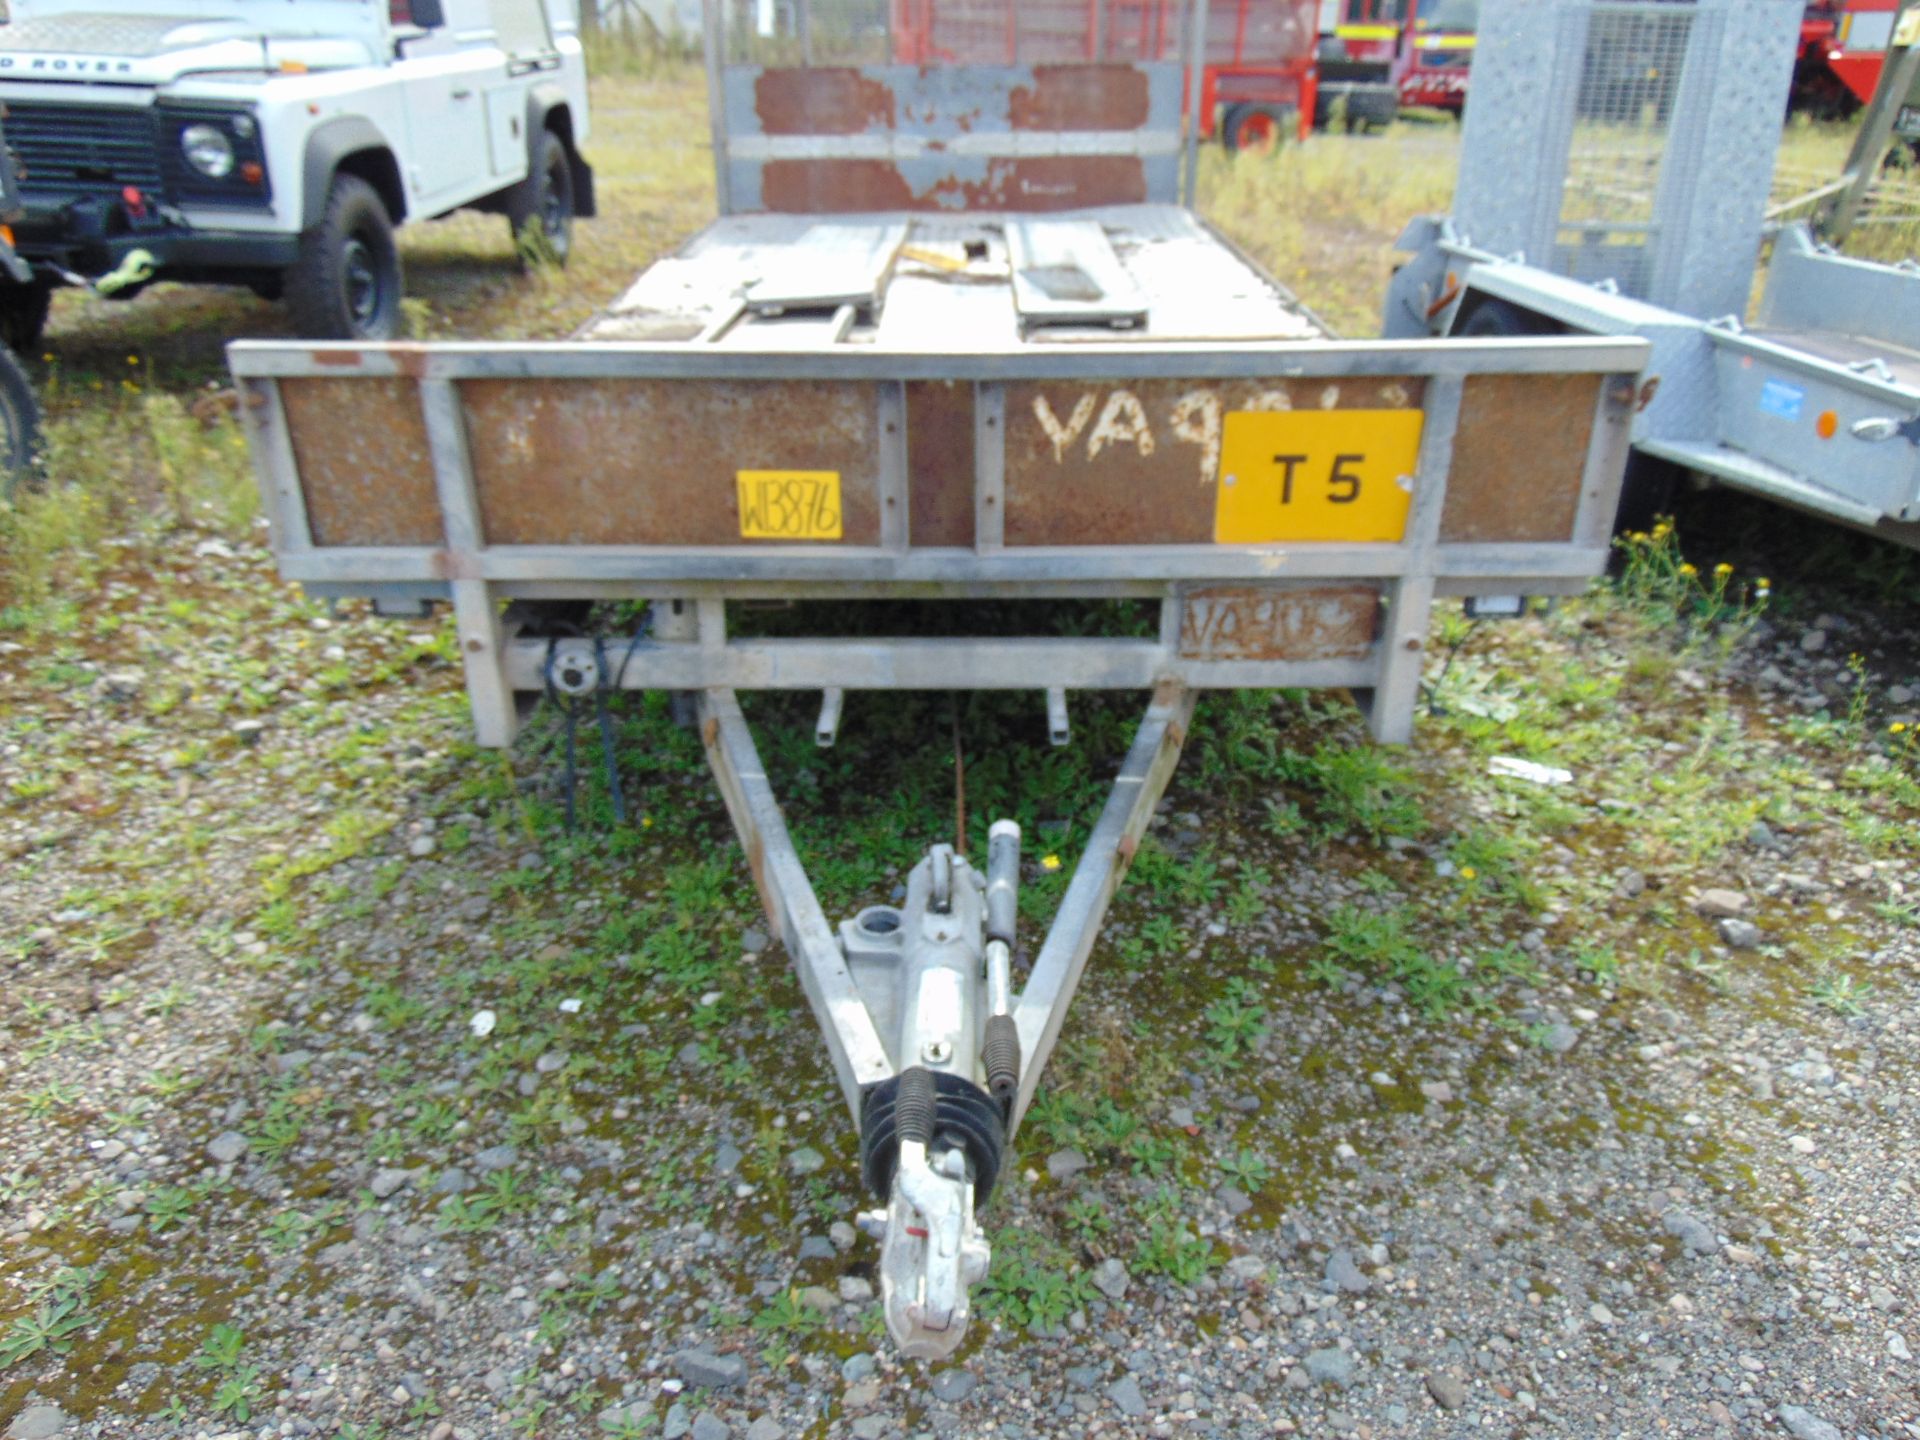 Ifor Williams 14 ft Twin Axle car/plant Trailer C/W Full Width Ramp and sides - Image 2 of 6